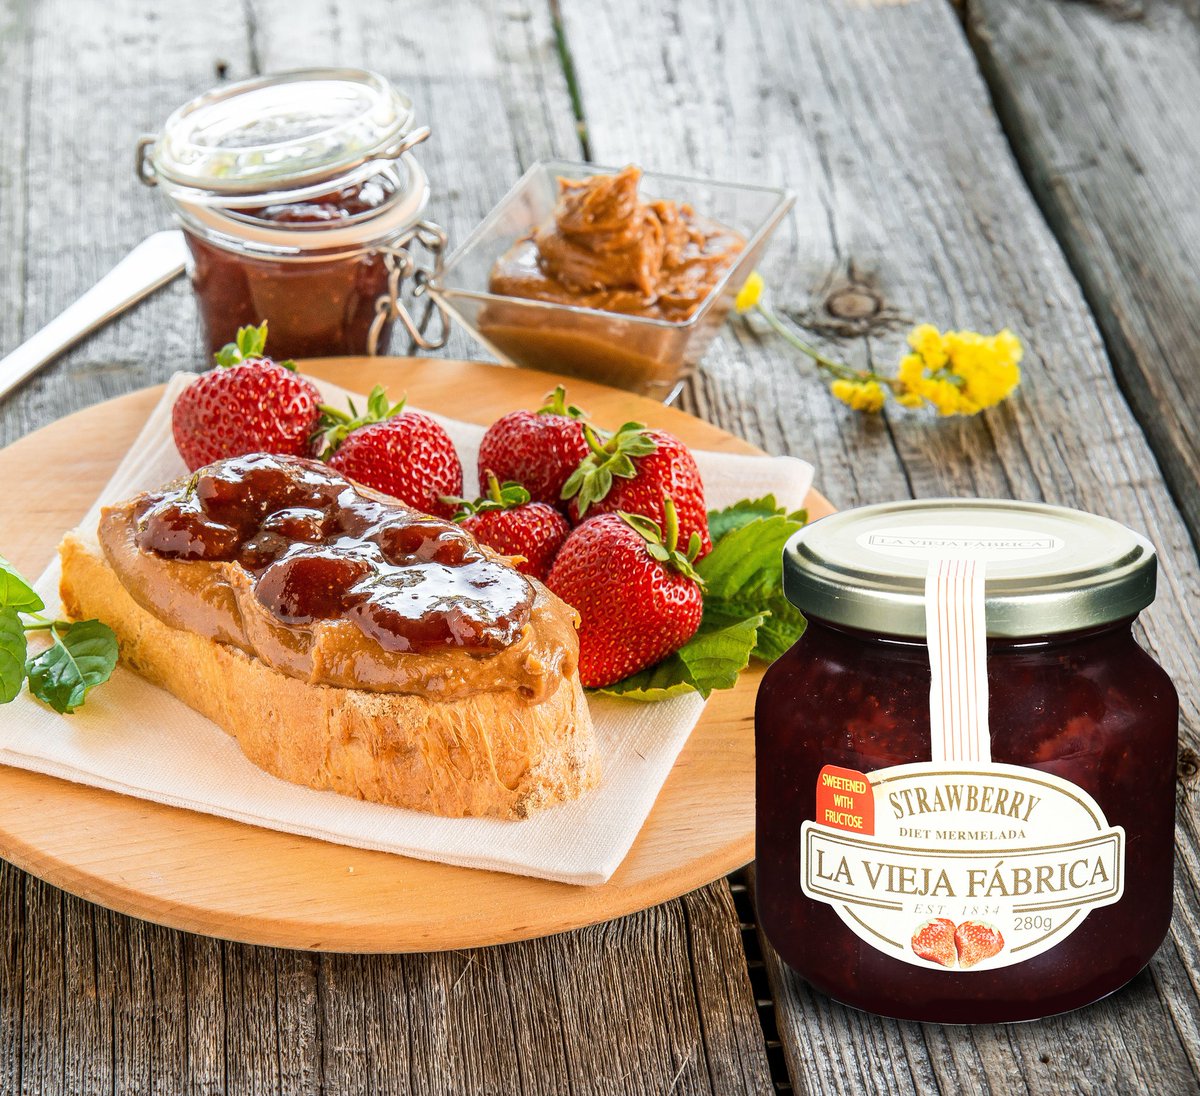 Give your day a perfect start with a Warm slice of toast with lvf strawberry jam  .
#lvfindia #laviejafabrica #gourmetbreakfast #vegan #fruitjams #yum #foodporn